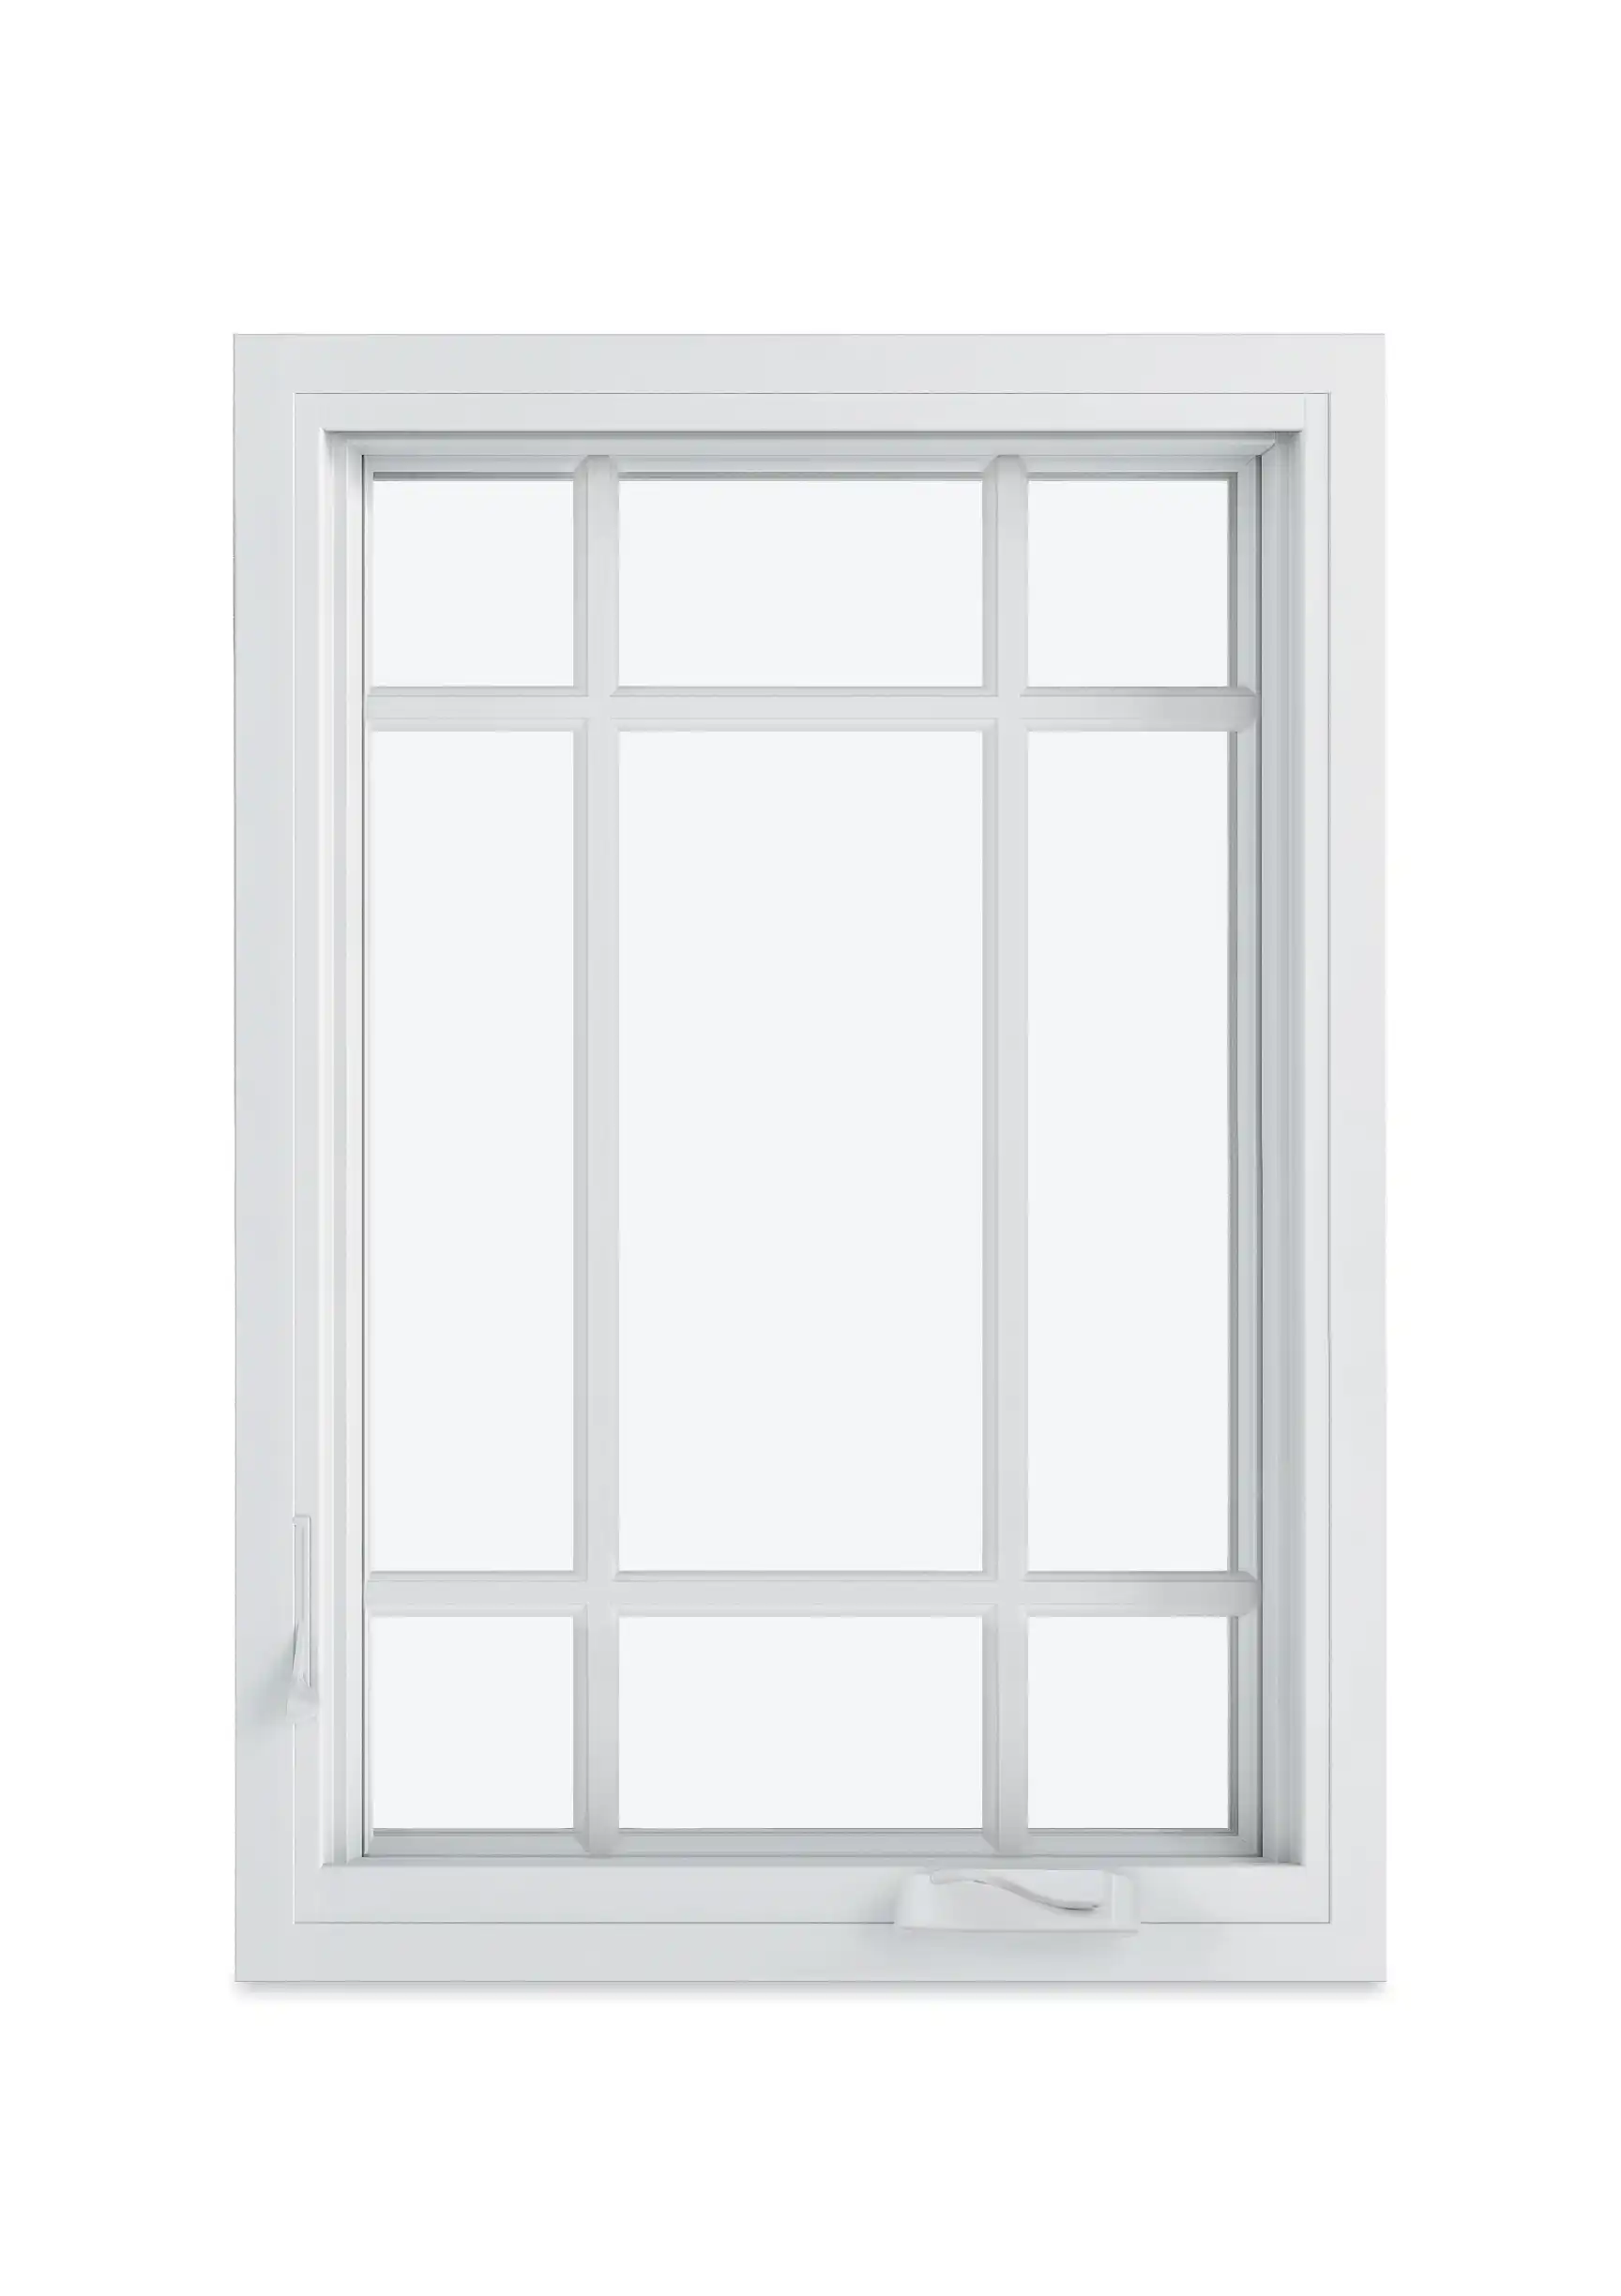 Image of a Marvin Replacement Casement window with a Prairie 9-Lite Divided Lite style.